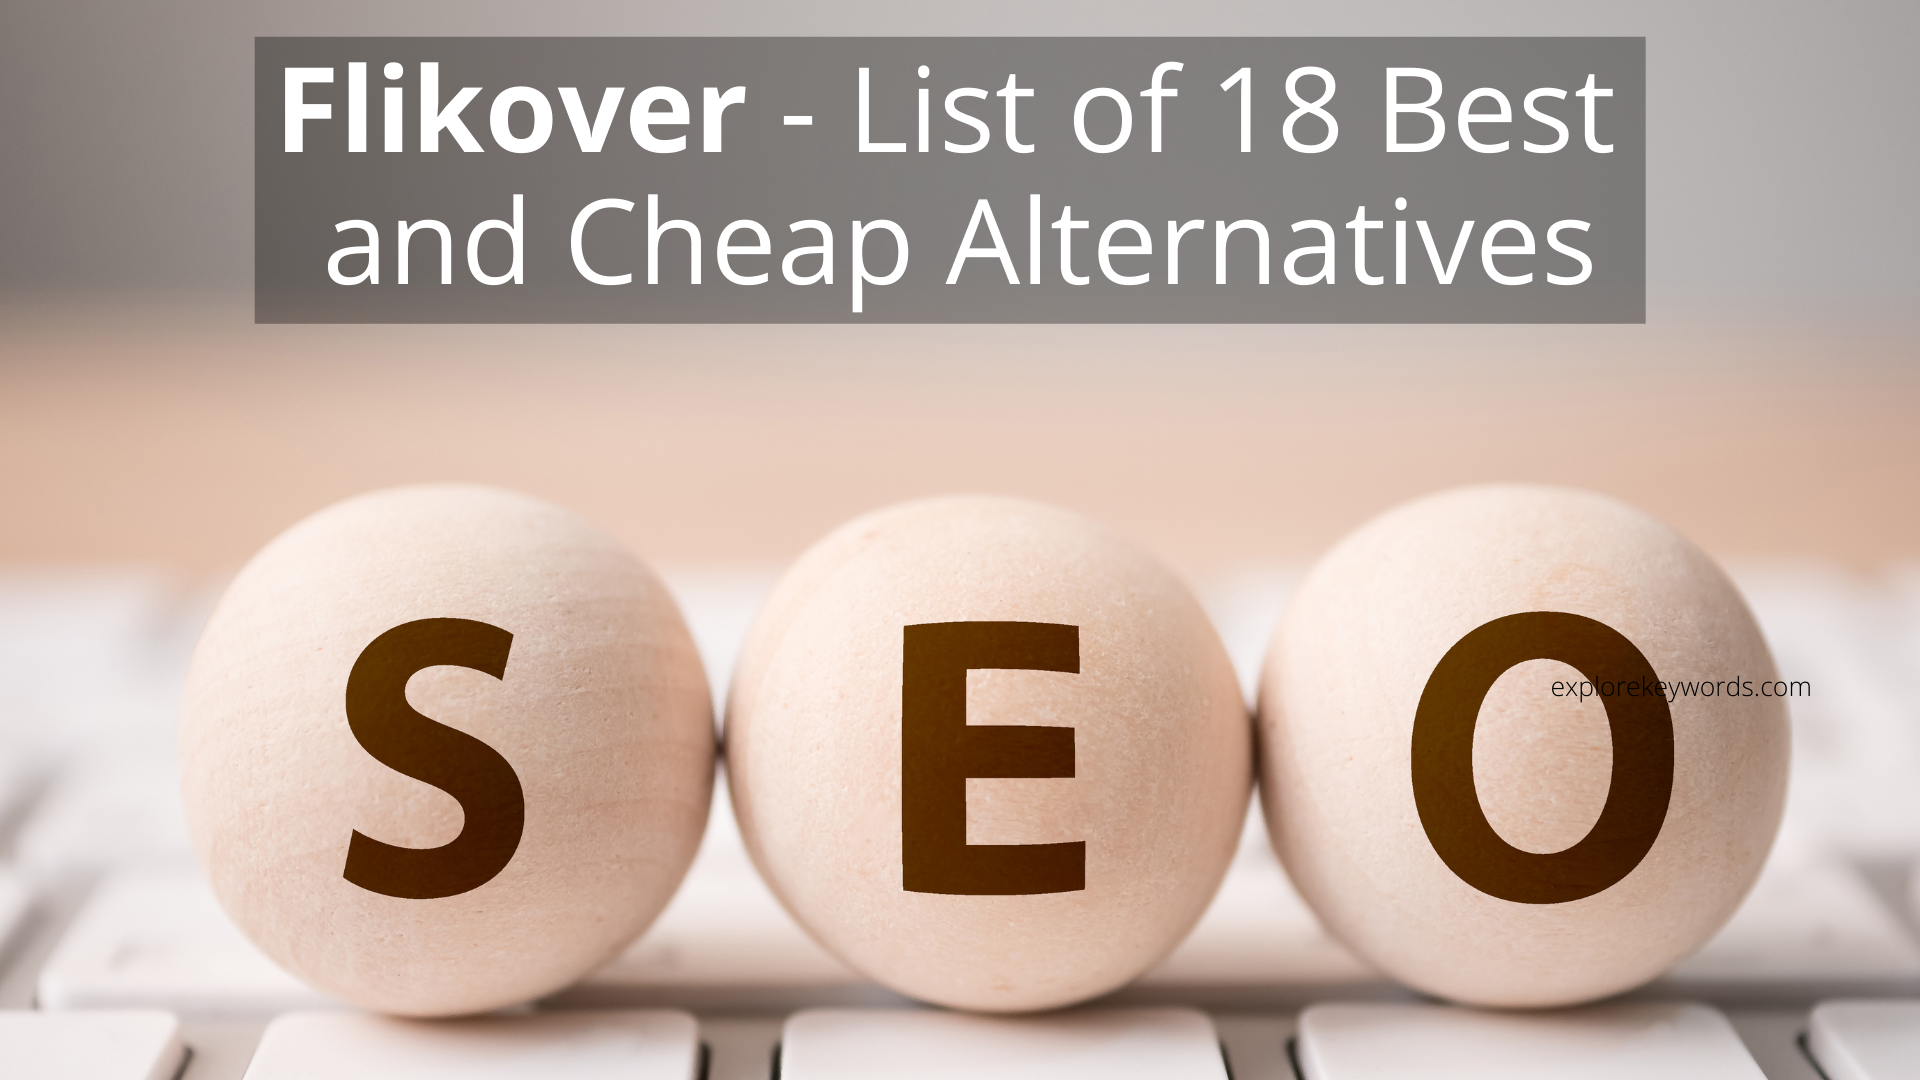 Flikover - List of 18 Best and Cheap Alternatives